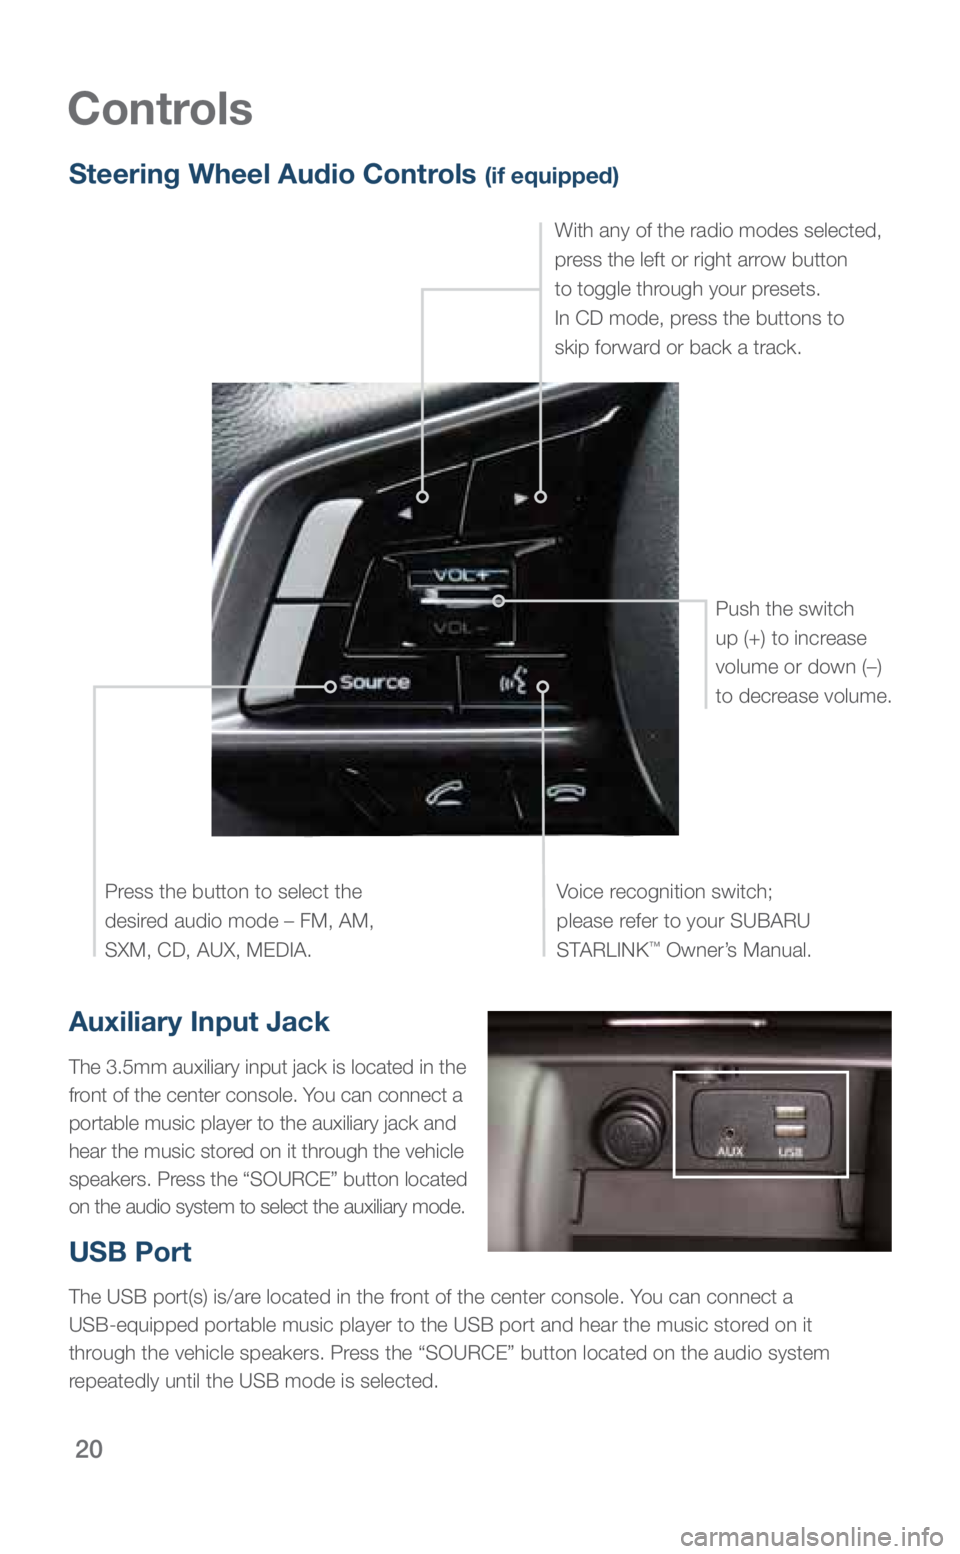 SUBARU OUTBACK 2019  Quick Guide 20
Controls
Auxiliary Input Jack
The 3.5mm auxiliary input jack is located in the 
front of the center console. You can connect a 
portable music player to the auxiliary jack and 
hear the music store